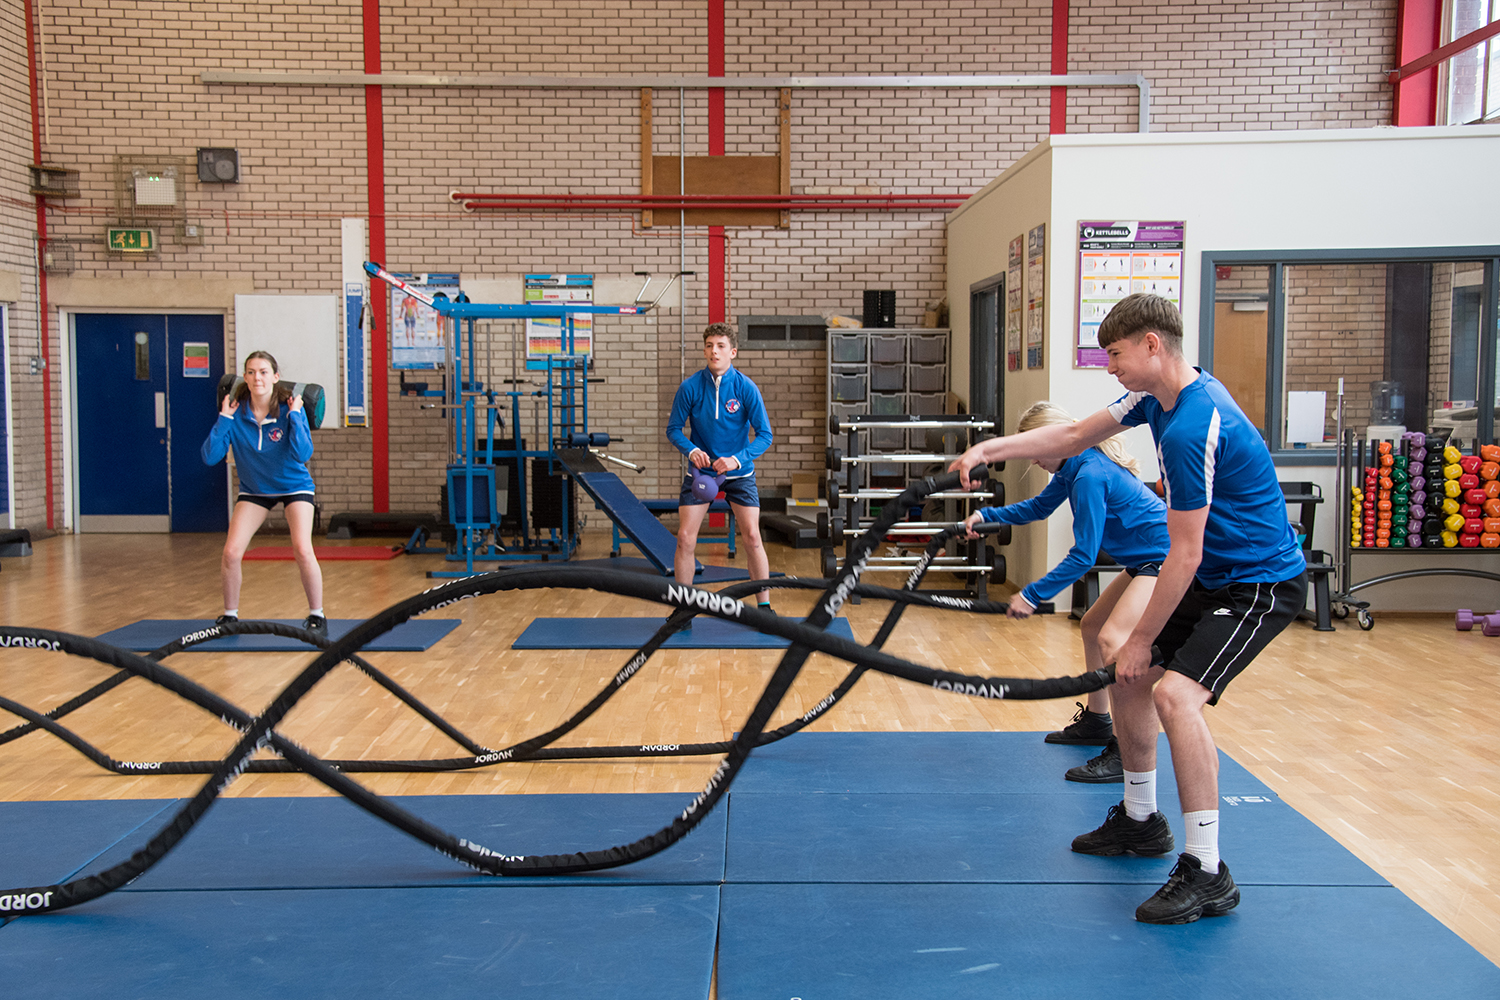 Male and female students in PE kits, two using weighted ropes and two lifting weights in sports hall